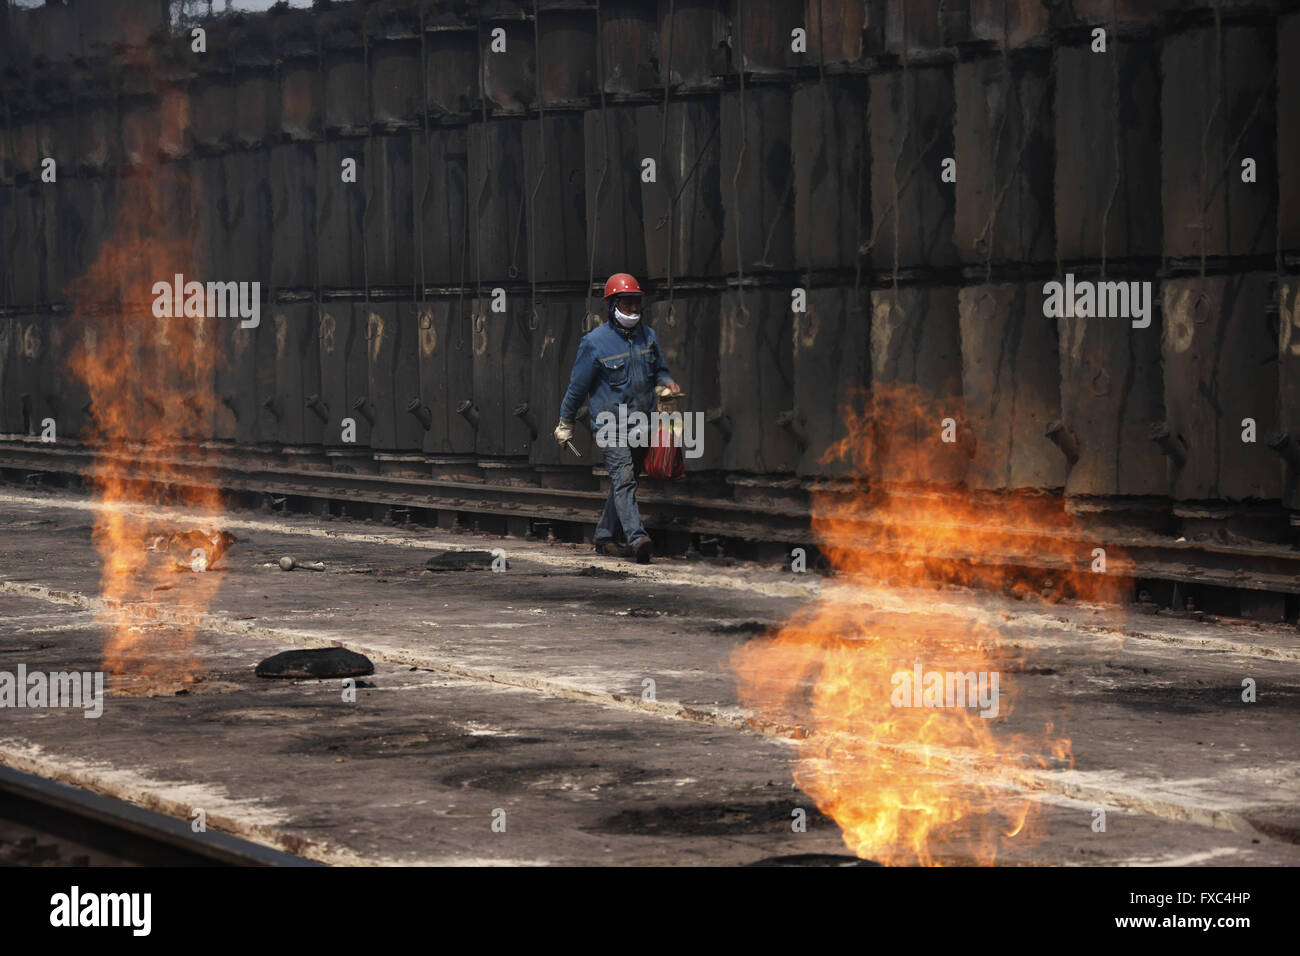 Huaibei, Huaibei, CHN. 13th Apr, 2016. Huaibei, CHINA - April 13 2016: (EDITORIAL USE ONLY. CHINA OUT) Coke oven workers step on the 1000-degrees-Celrius coke oven. It is totalling a flaming mountain here. They take coal out, load coal, push coke, block, sweep and dust, furnace temperature, open and close the riser, and tamp briquettes, push coke on trucks, trains, stop the coke car. Coal industry depresses now and influences their payment. But they still work off steam. © SIPA Asia/ZUMA Wire/Alamy Live News Stock Photo